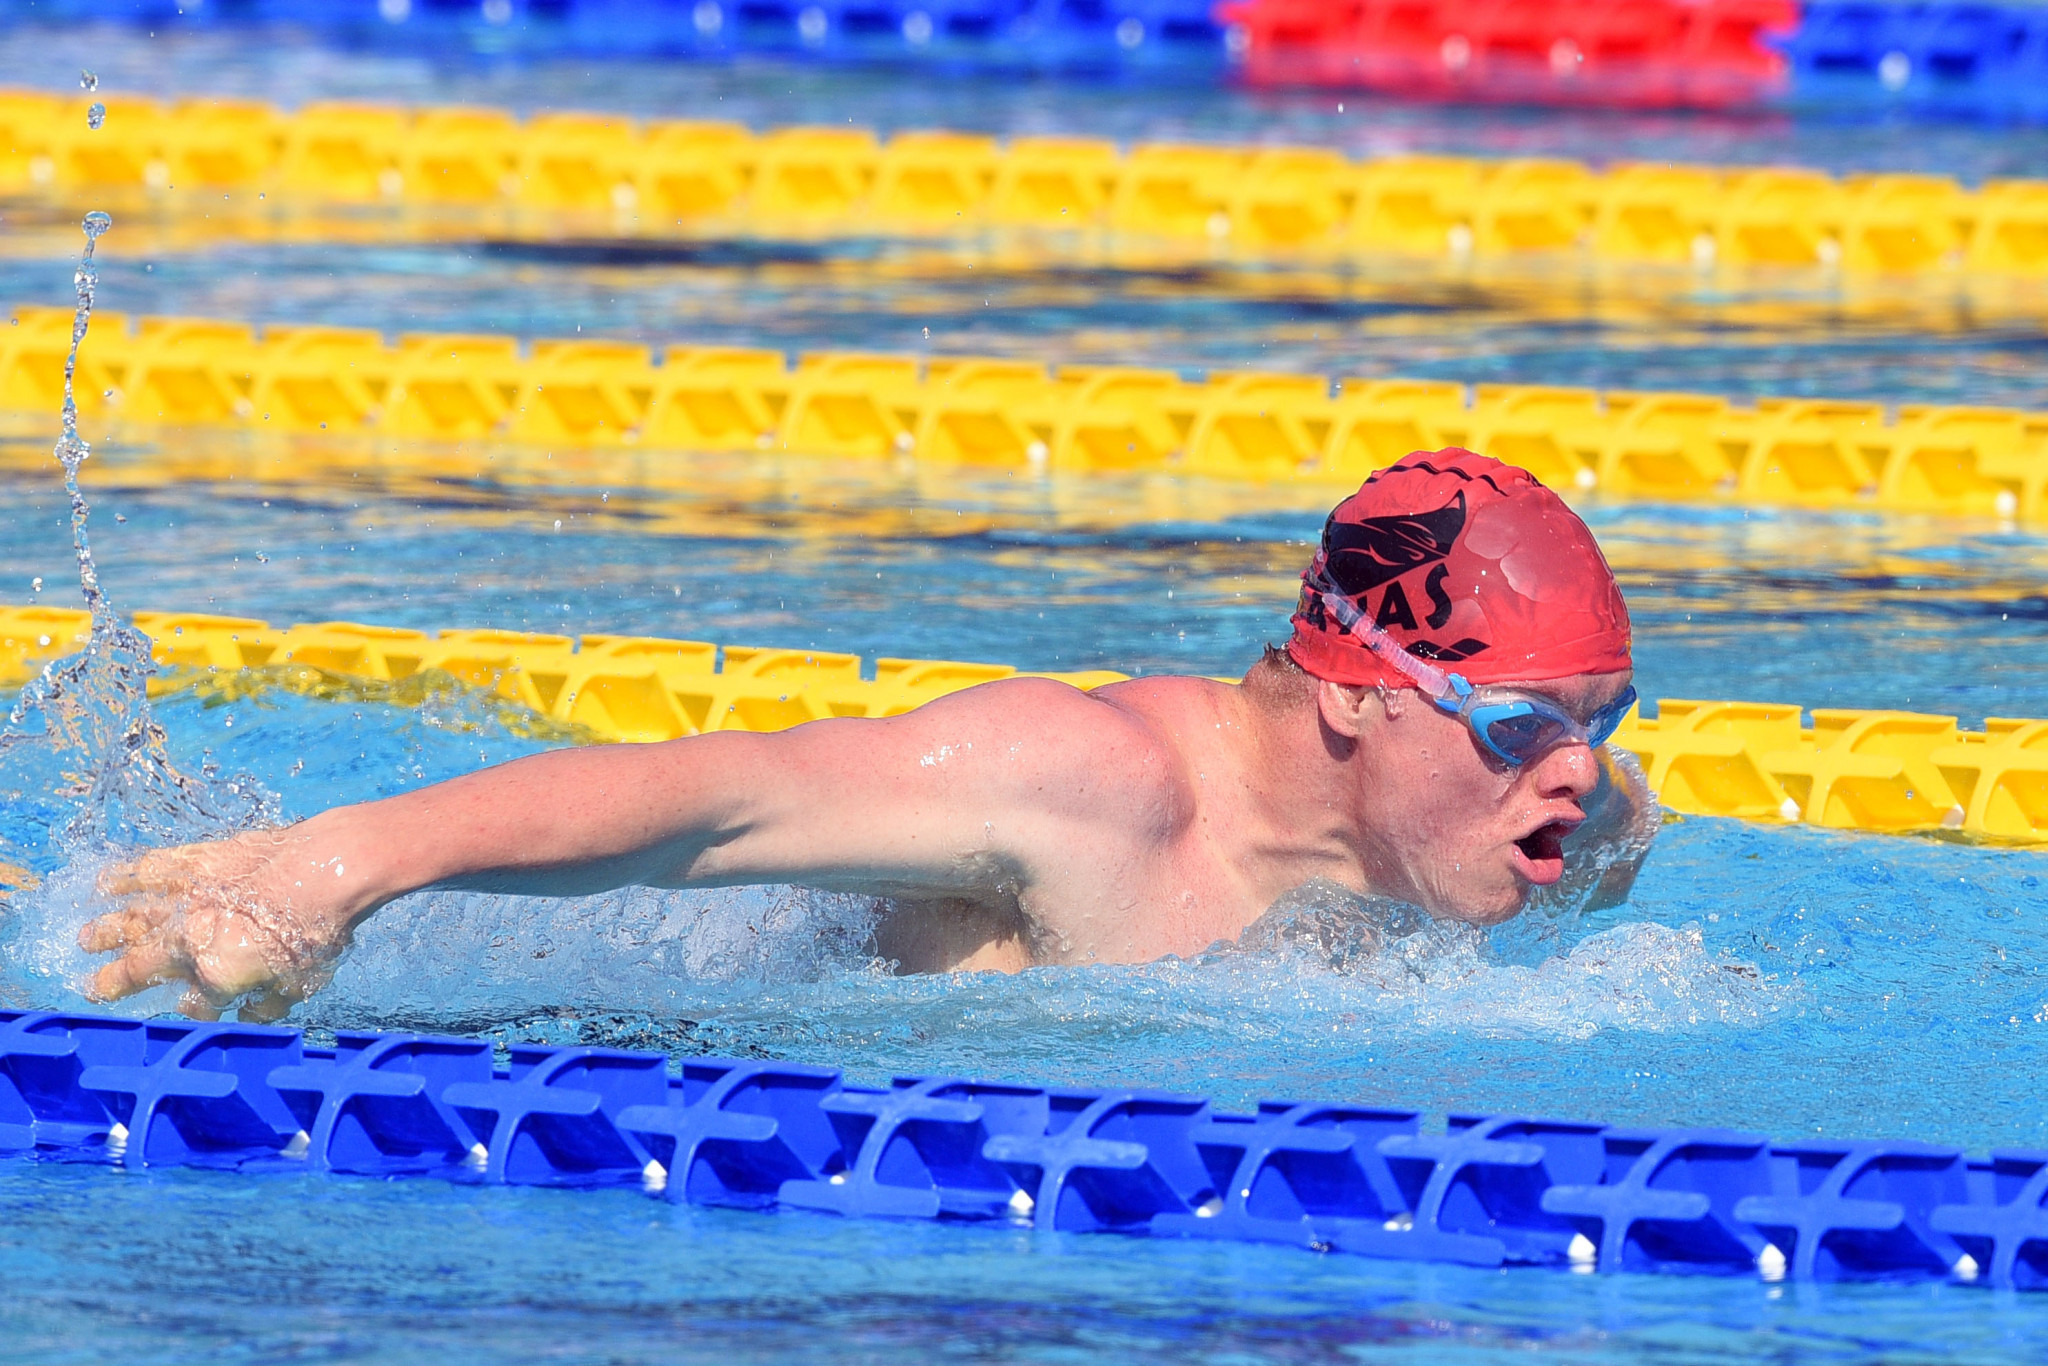 Swimming coach Lee Portingale has called for the rules on Down's syndrome swimmers at the Paralympics to be re-examined ©Getty Images